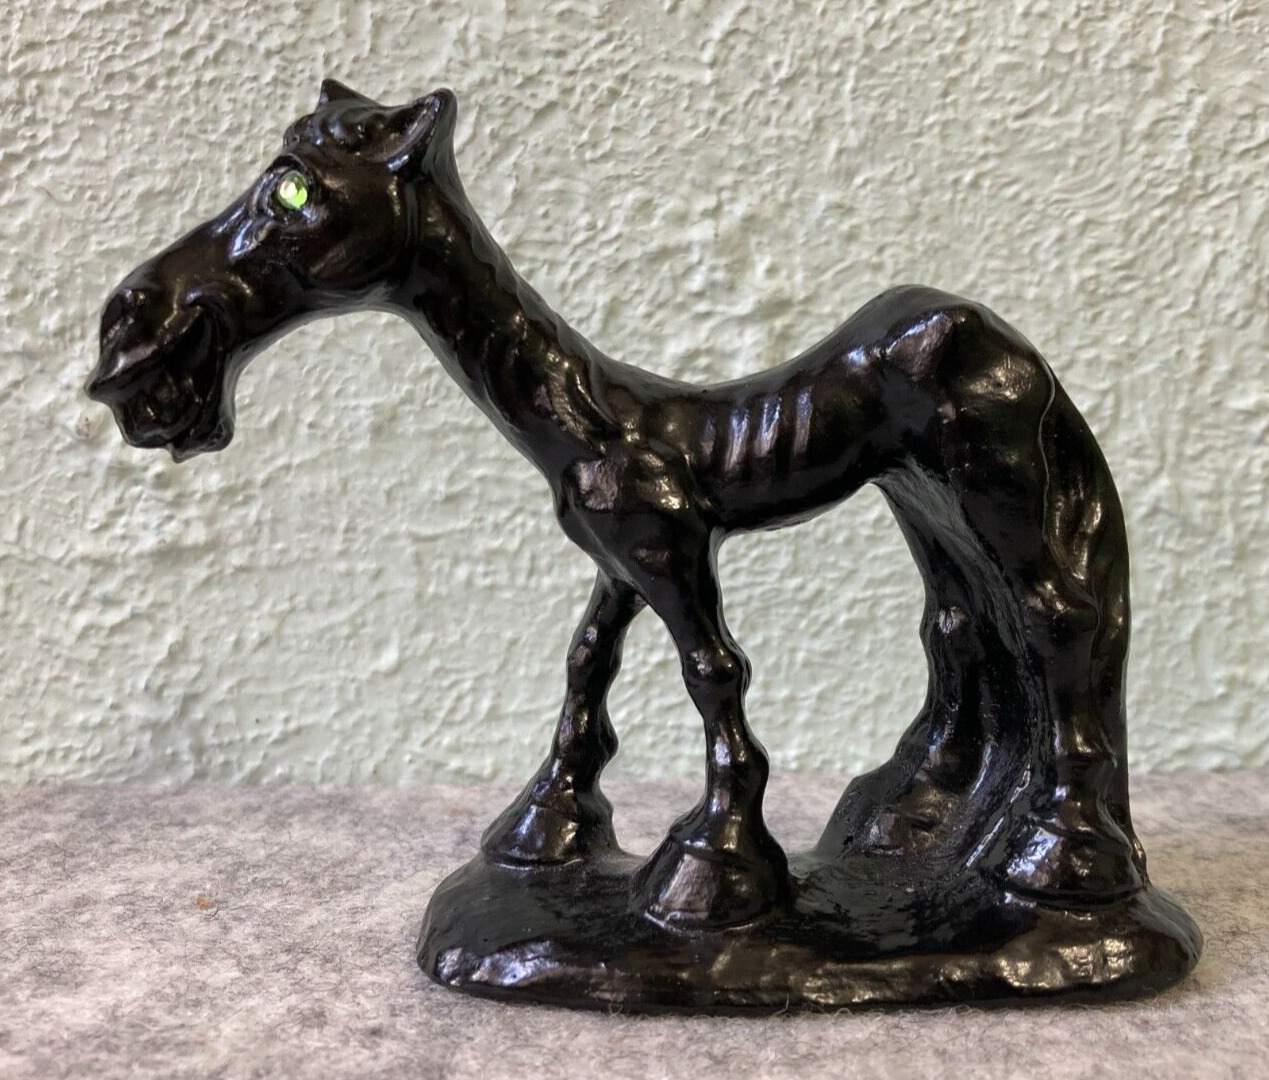 Vintage Green Rhinestone Eyes Smiling Starving Horse Mule Hand Crafted from Coal